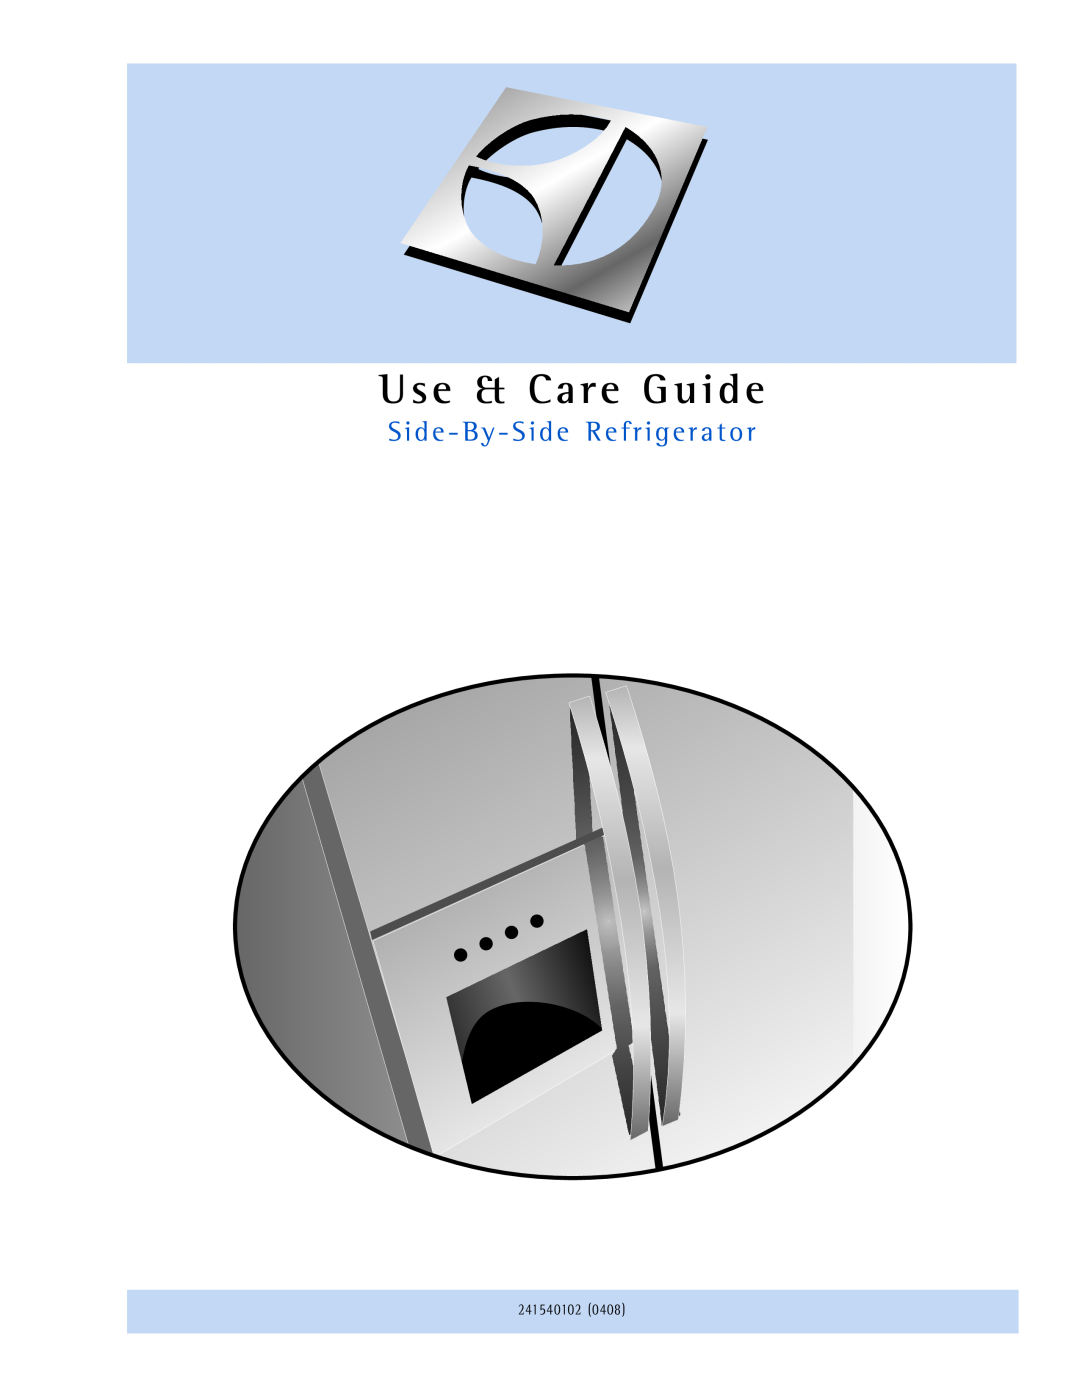 Electrolux 241540102 manual Use & Care Guide, S i d e - B y - S i d e R e f r i g e r a t o r 